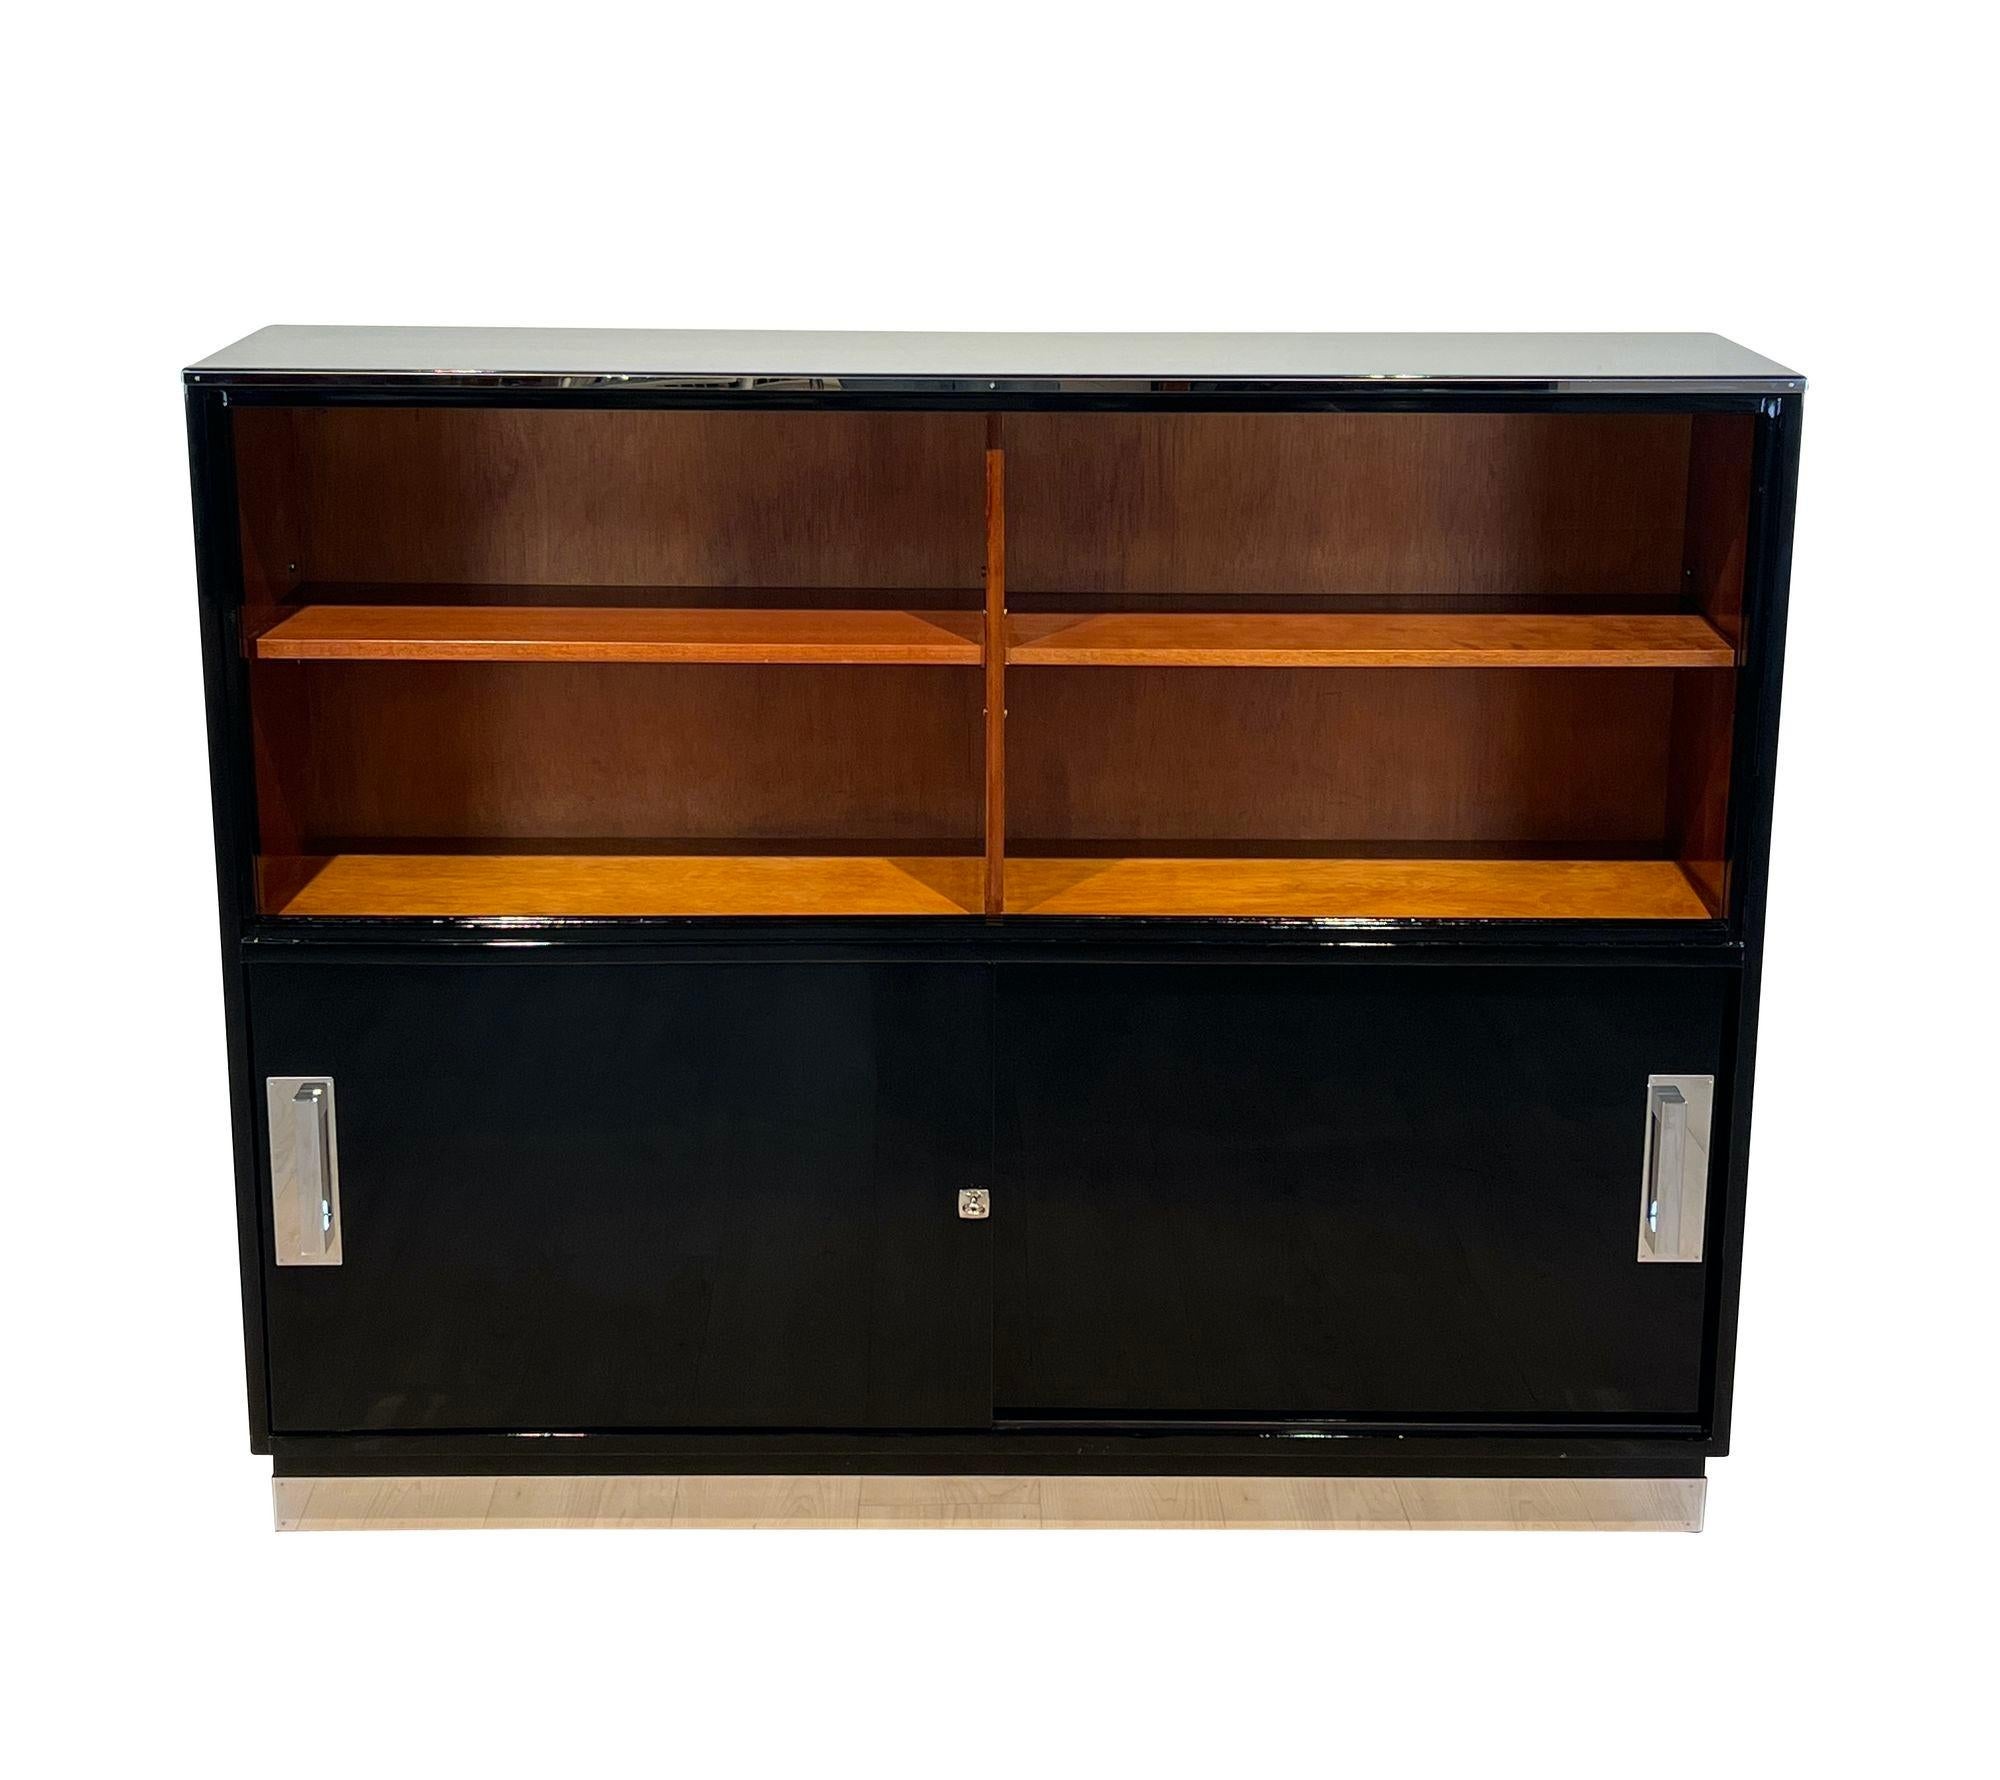 Elegant, cleanlined Bauhaus office wall cabinet or cupboard. Two available. Fully restored, from Germany circa 1930.
Black high gloss piano lacquer surface. Interior in mahogany, satin matte lacquered.
High stainless steel trim running around the